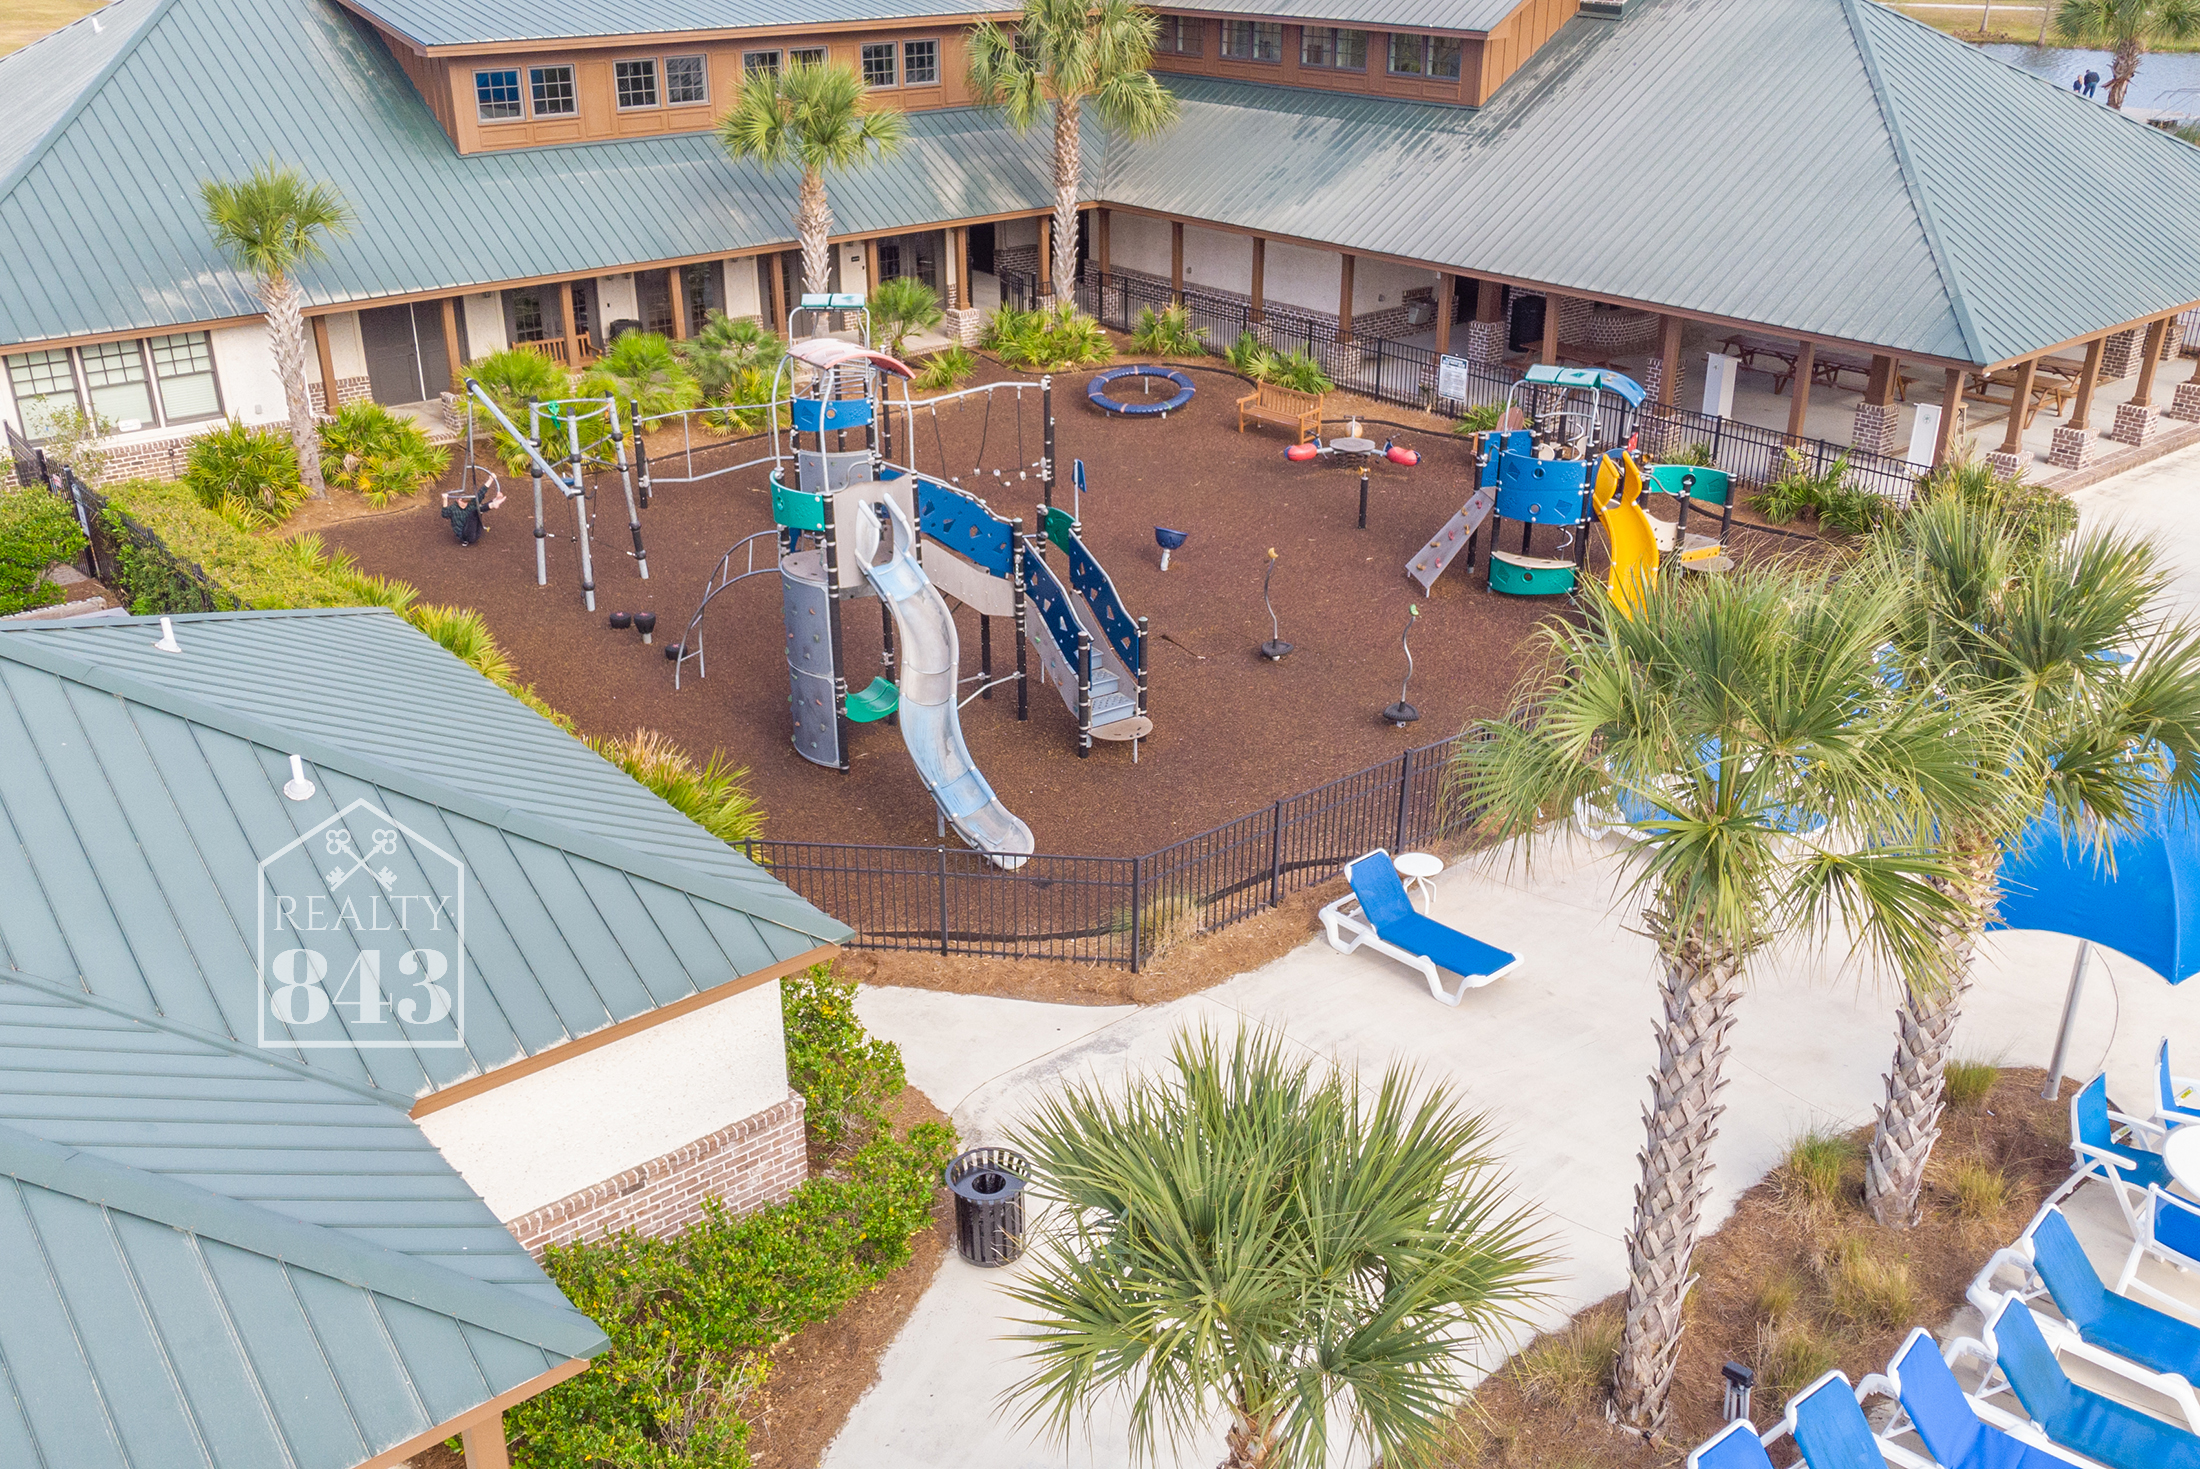 Playground Access from Pool Area